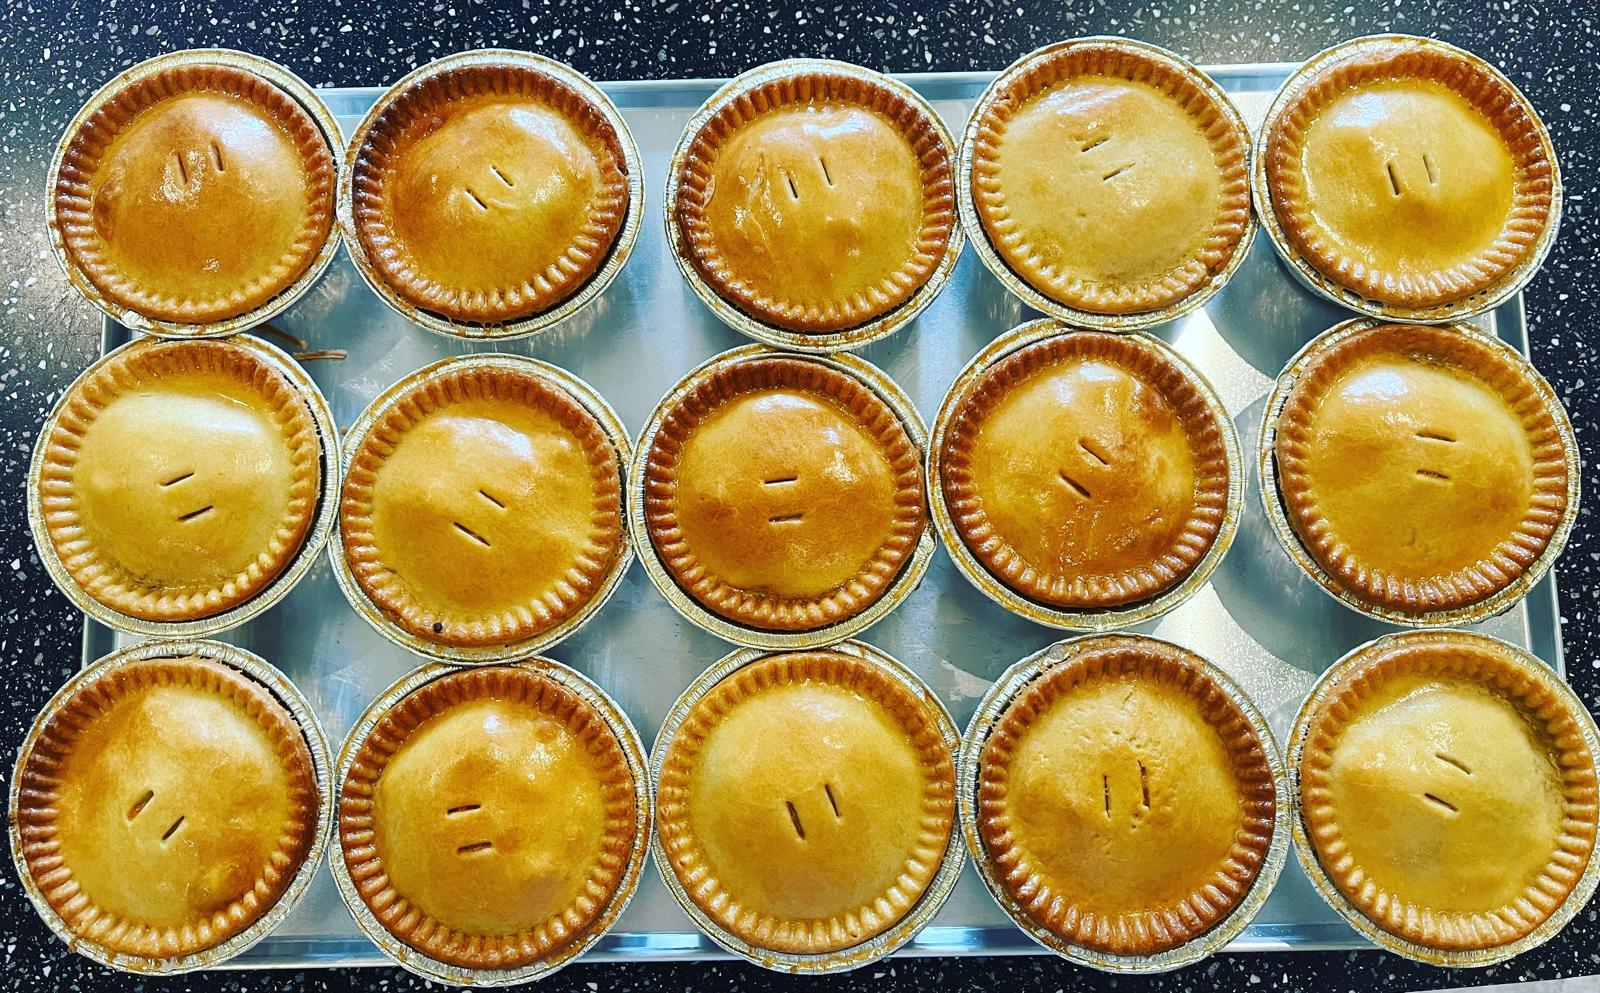 Pies fresh from the oven